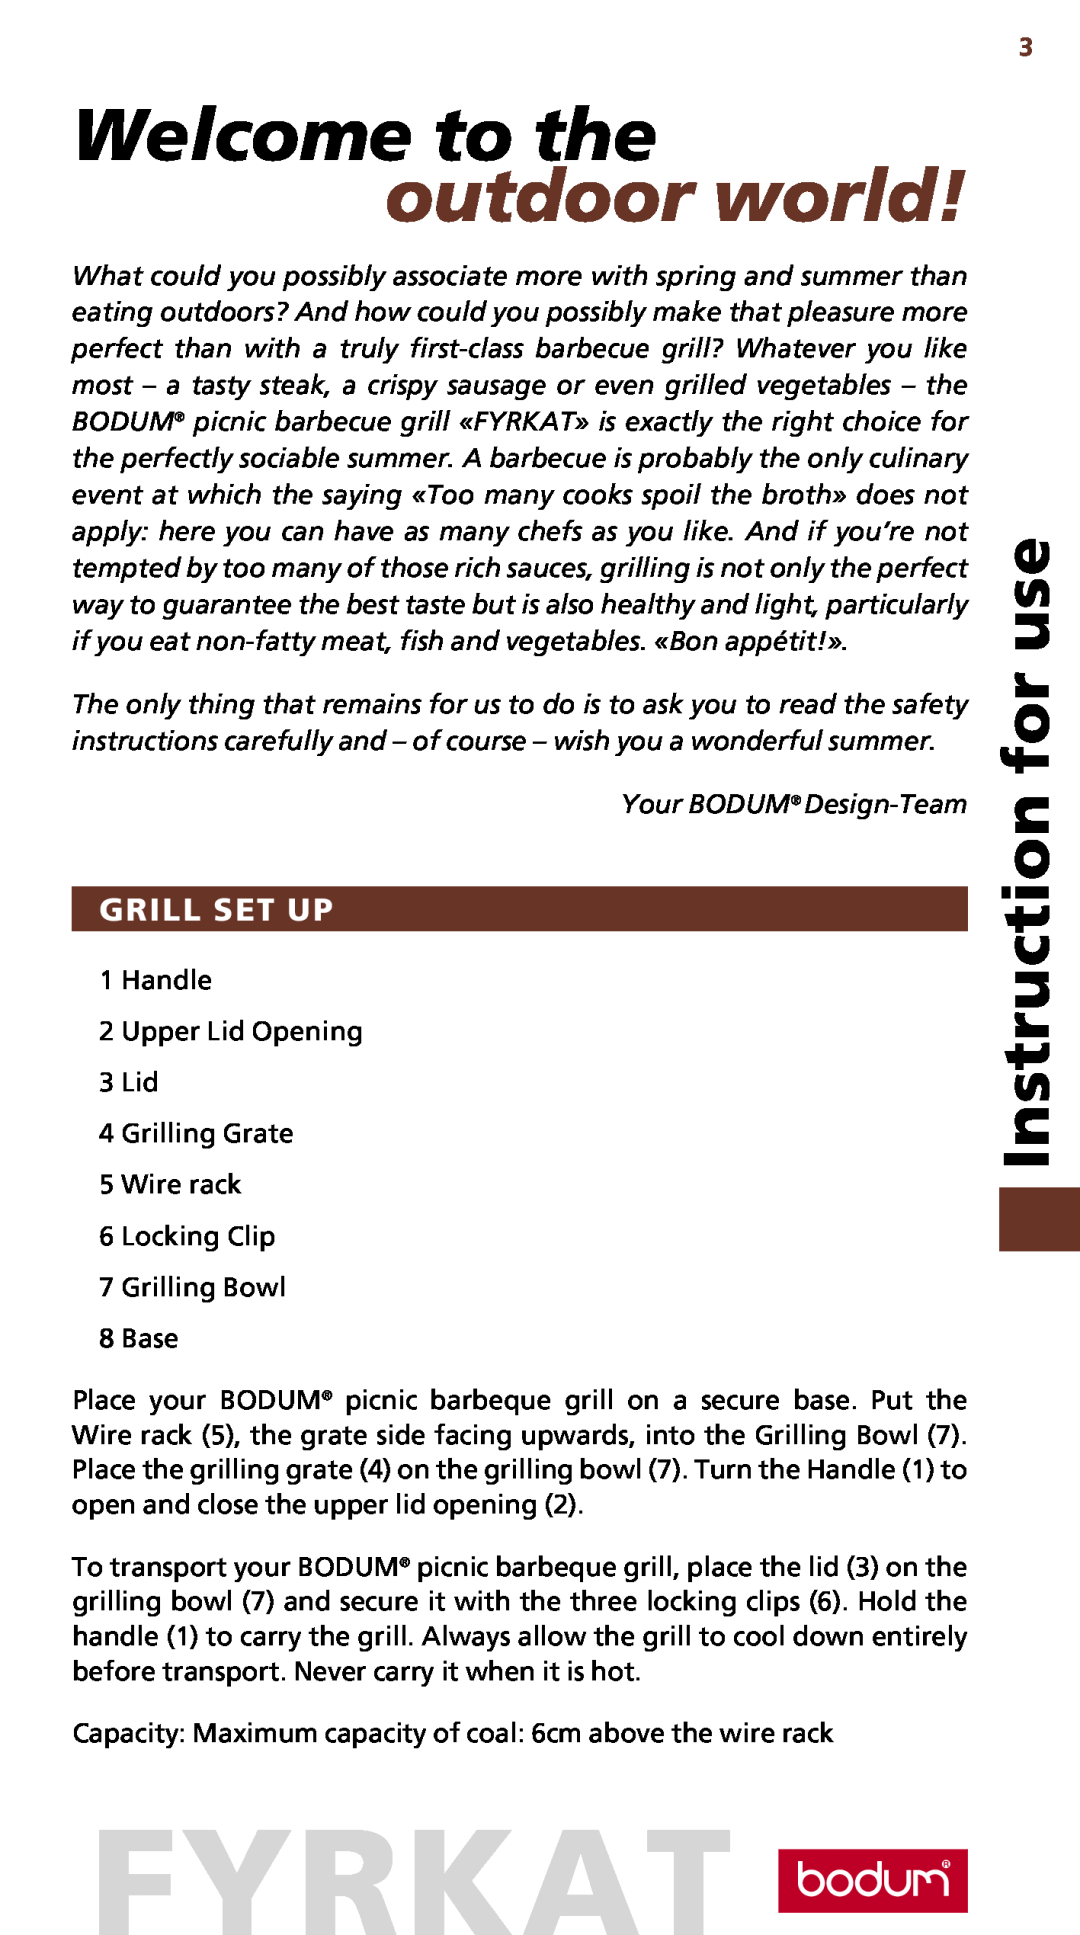 Bodum 10630 manual Welcome to the outdoor world, Instruction for use, Grill Set Up, fyrkat 